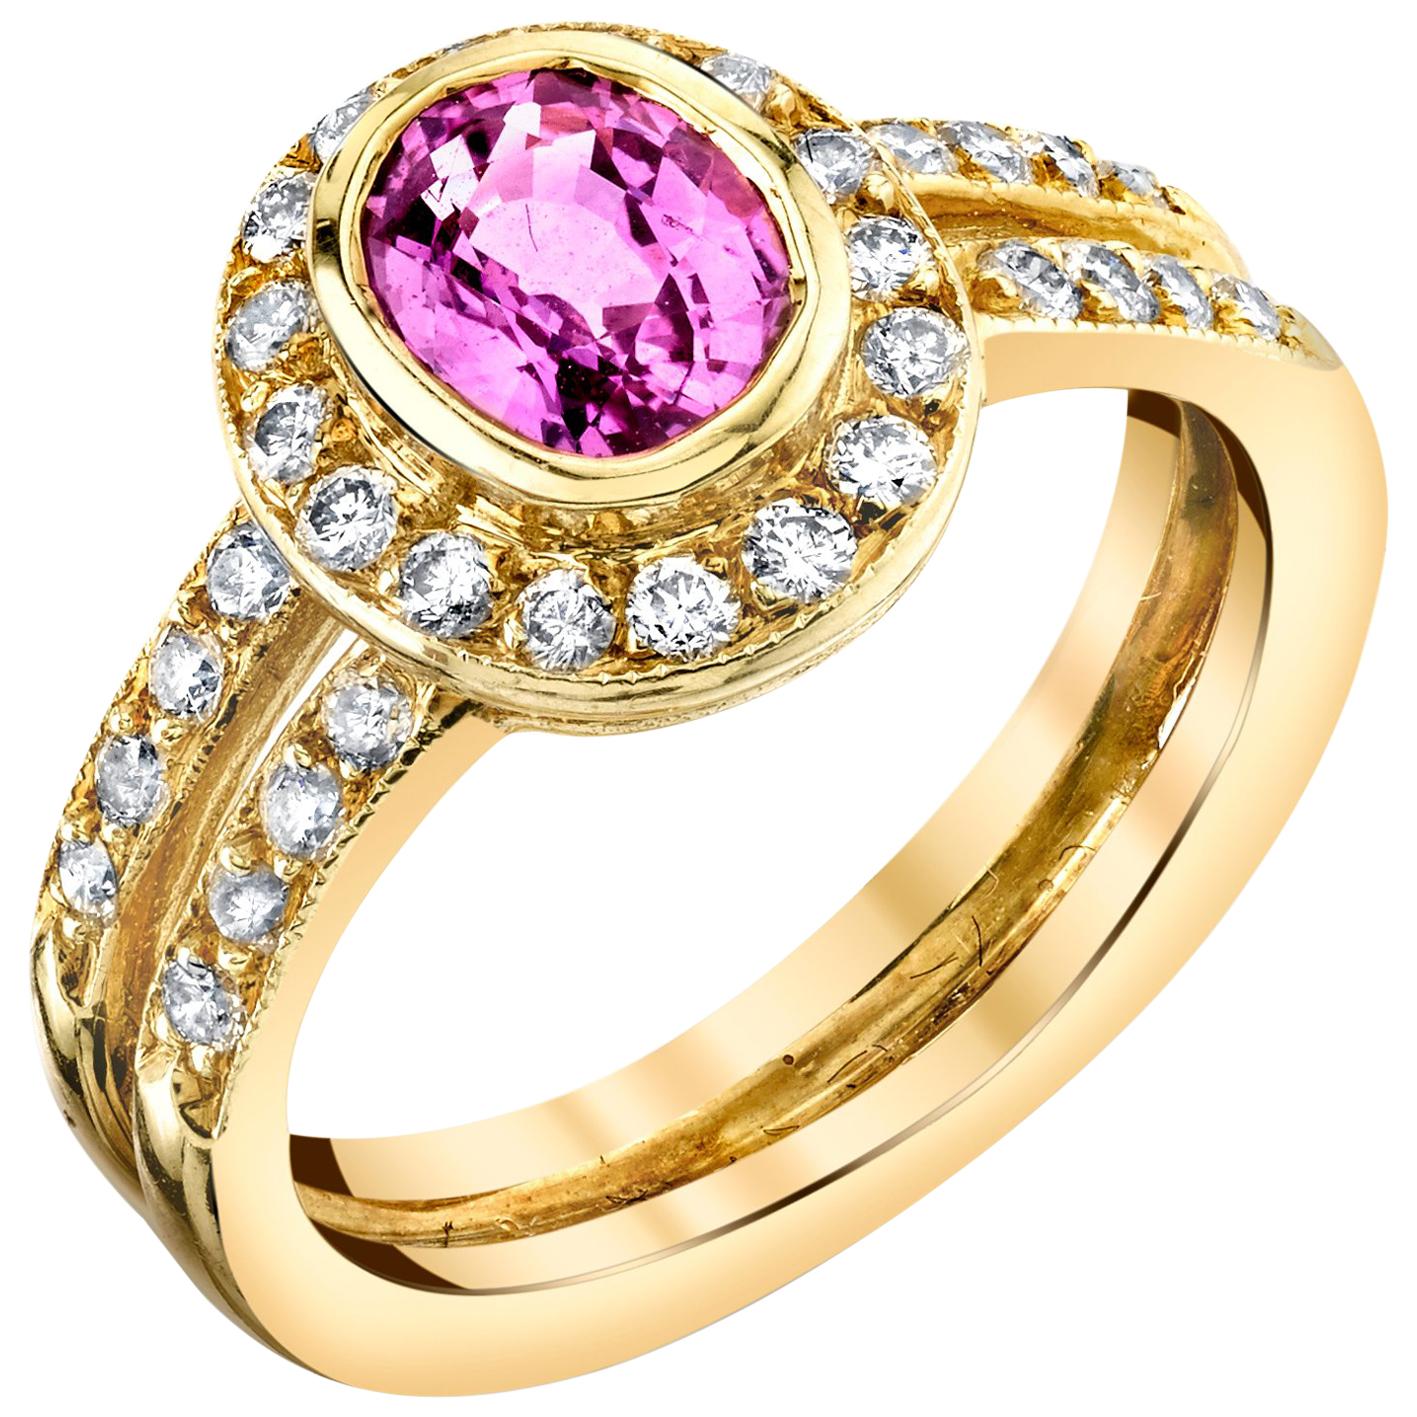 1.14 Carat Pink Sapphire and Diamond Halo Engagement Ring in 18k Gold